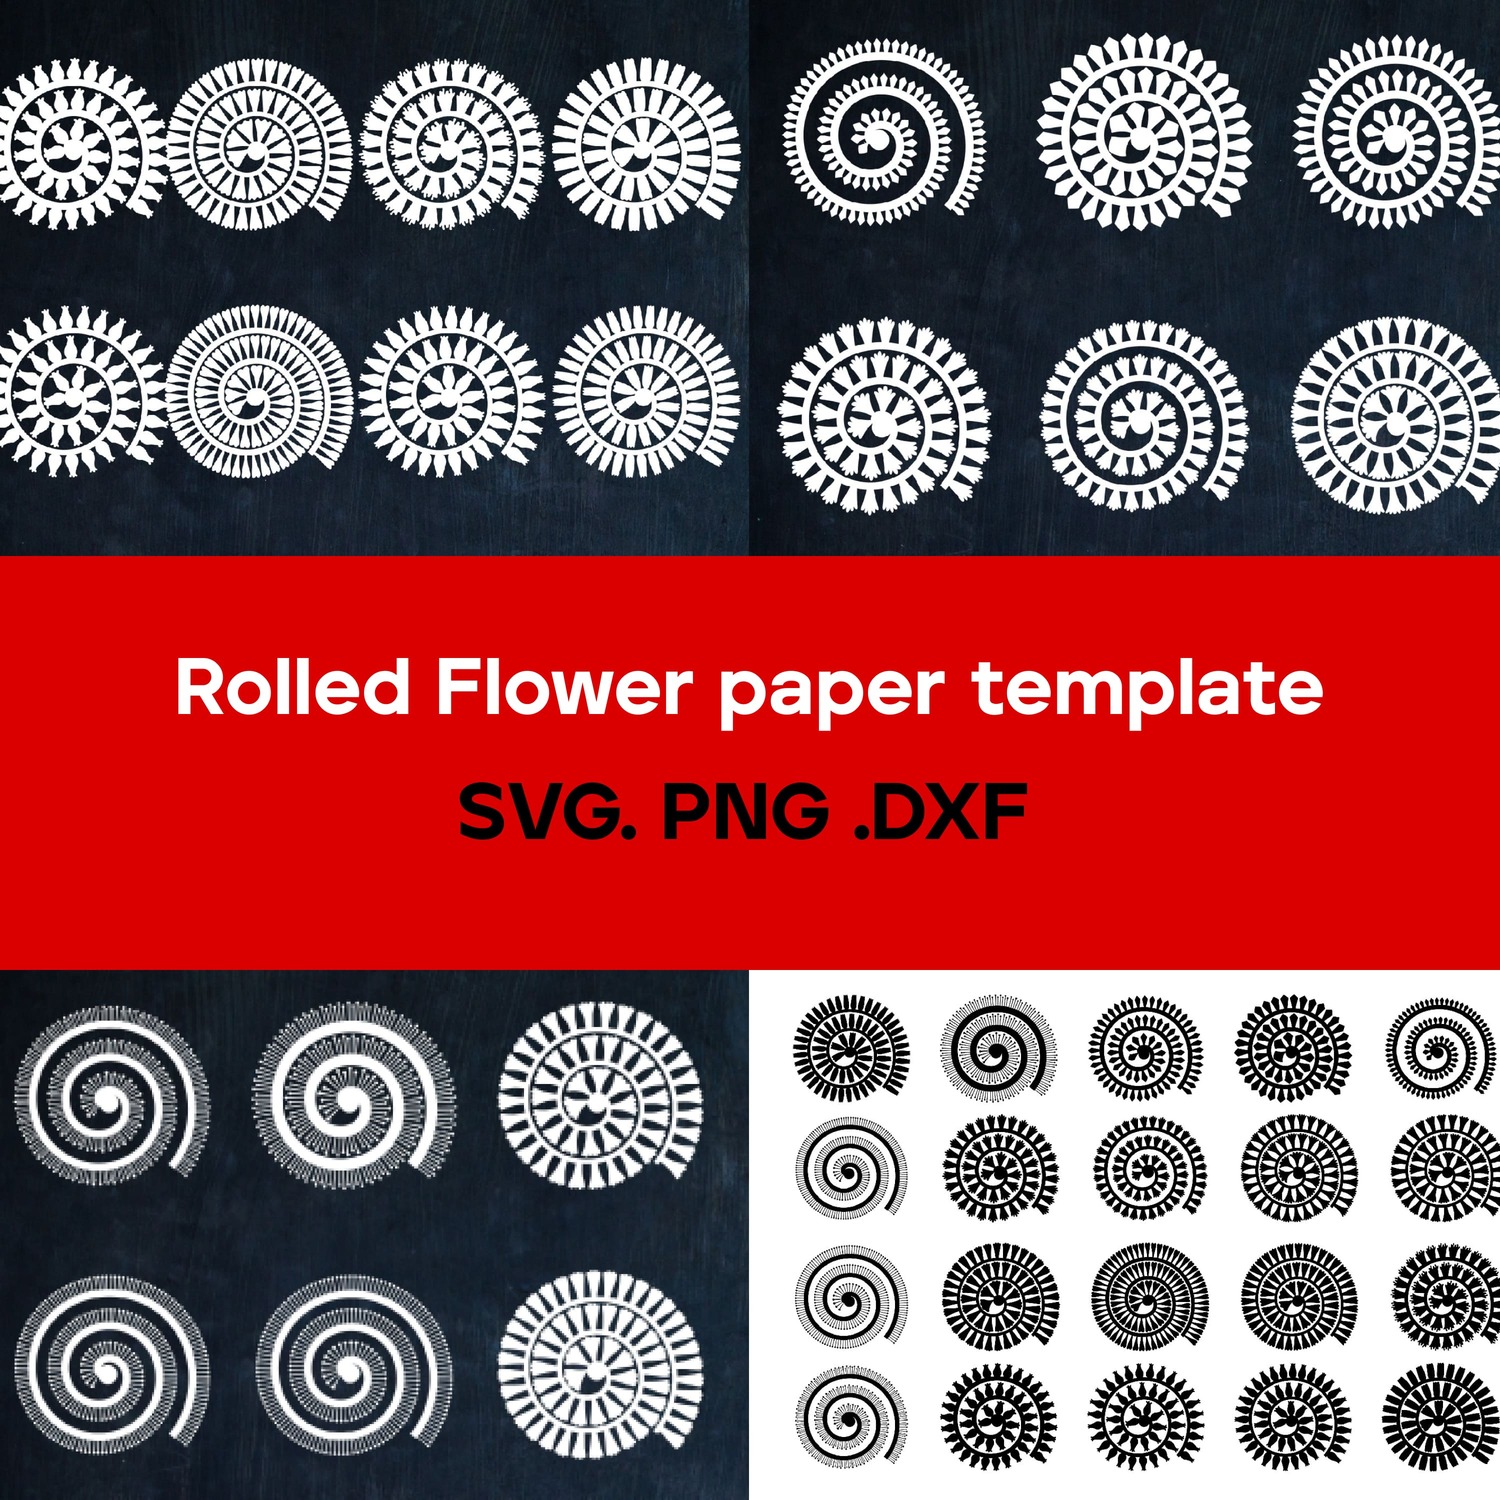 Rolled Flower paper template SVG. main cover.